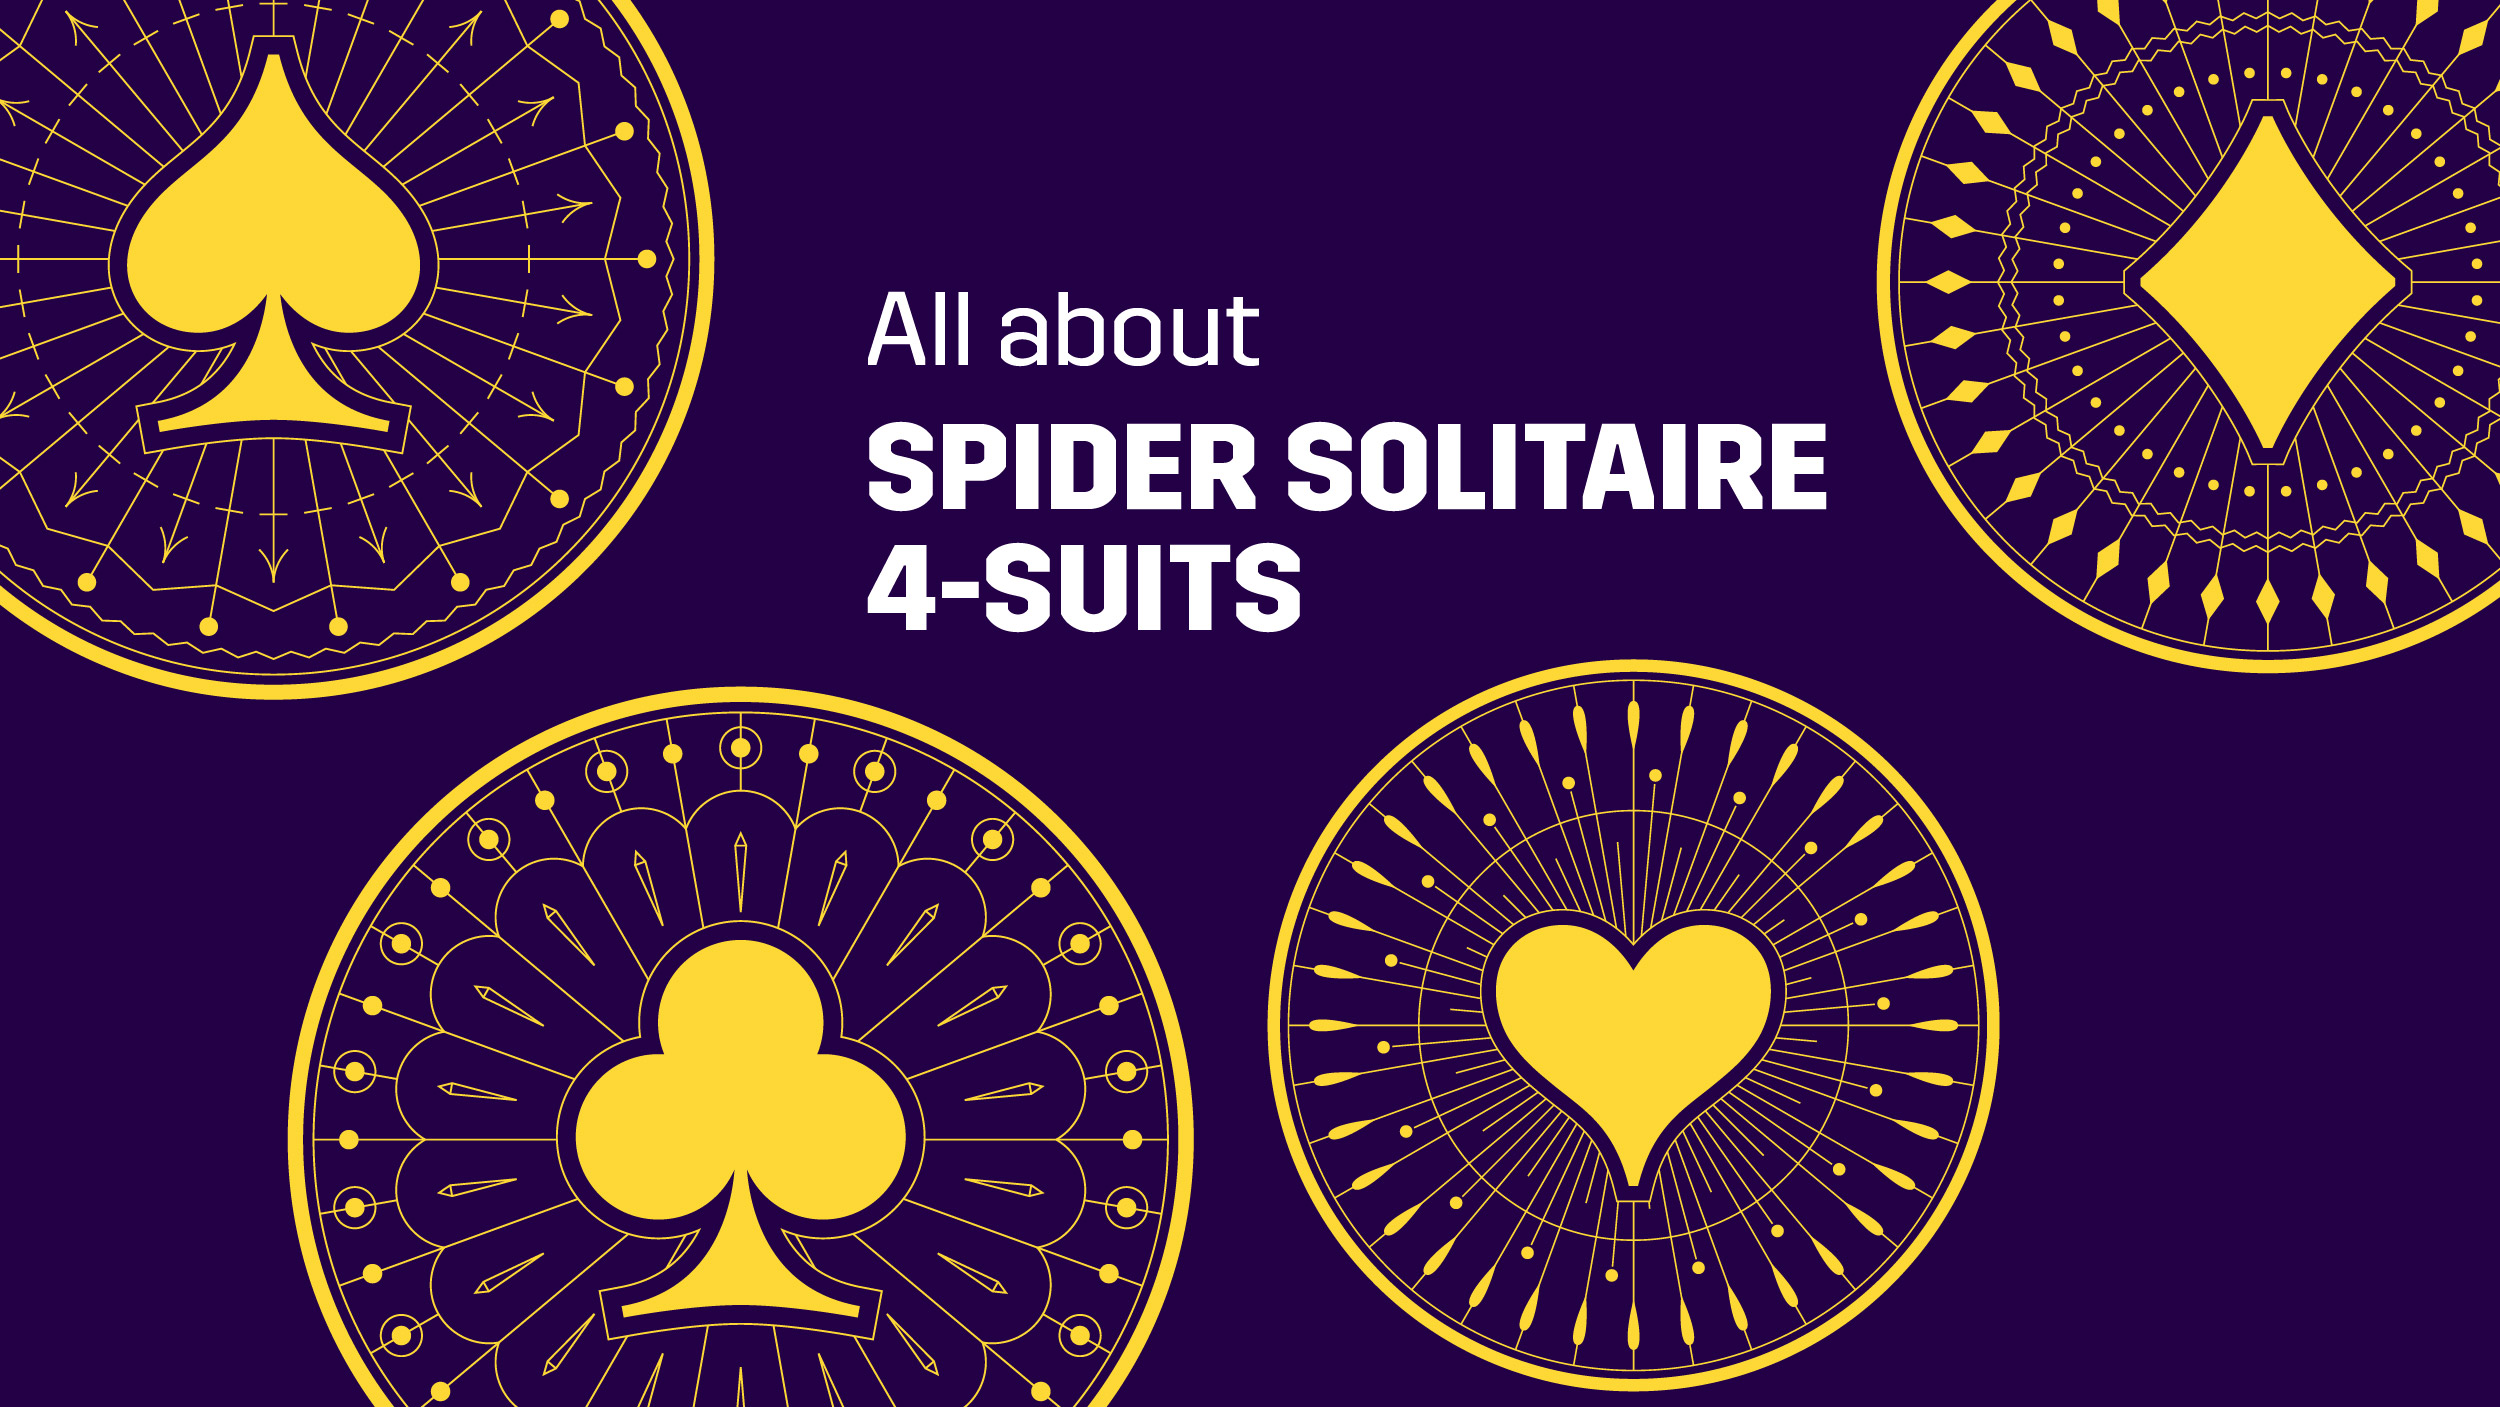 spider solitaire 4-suits